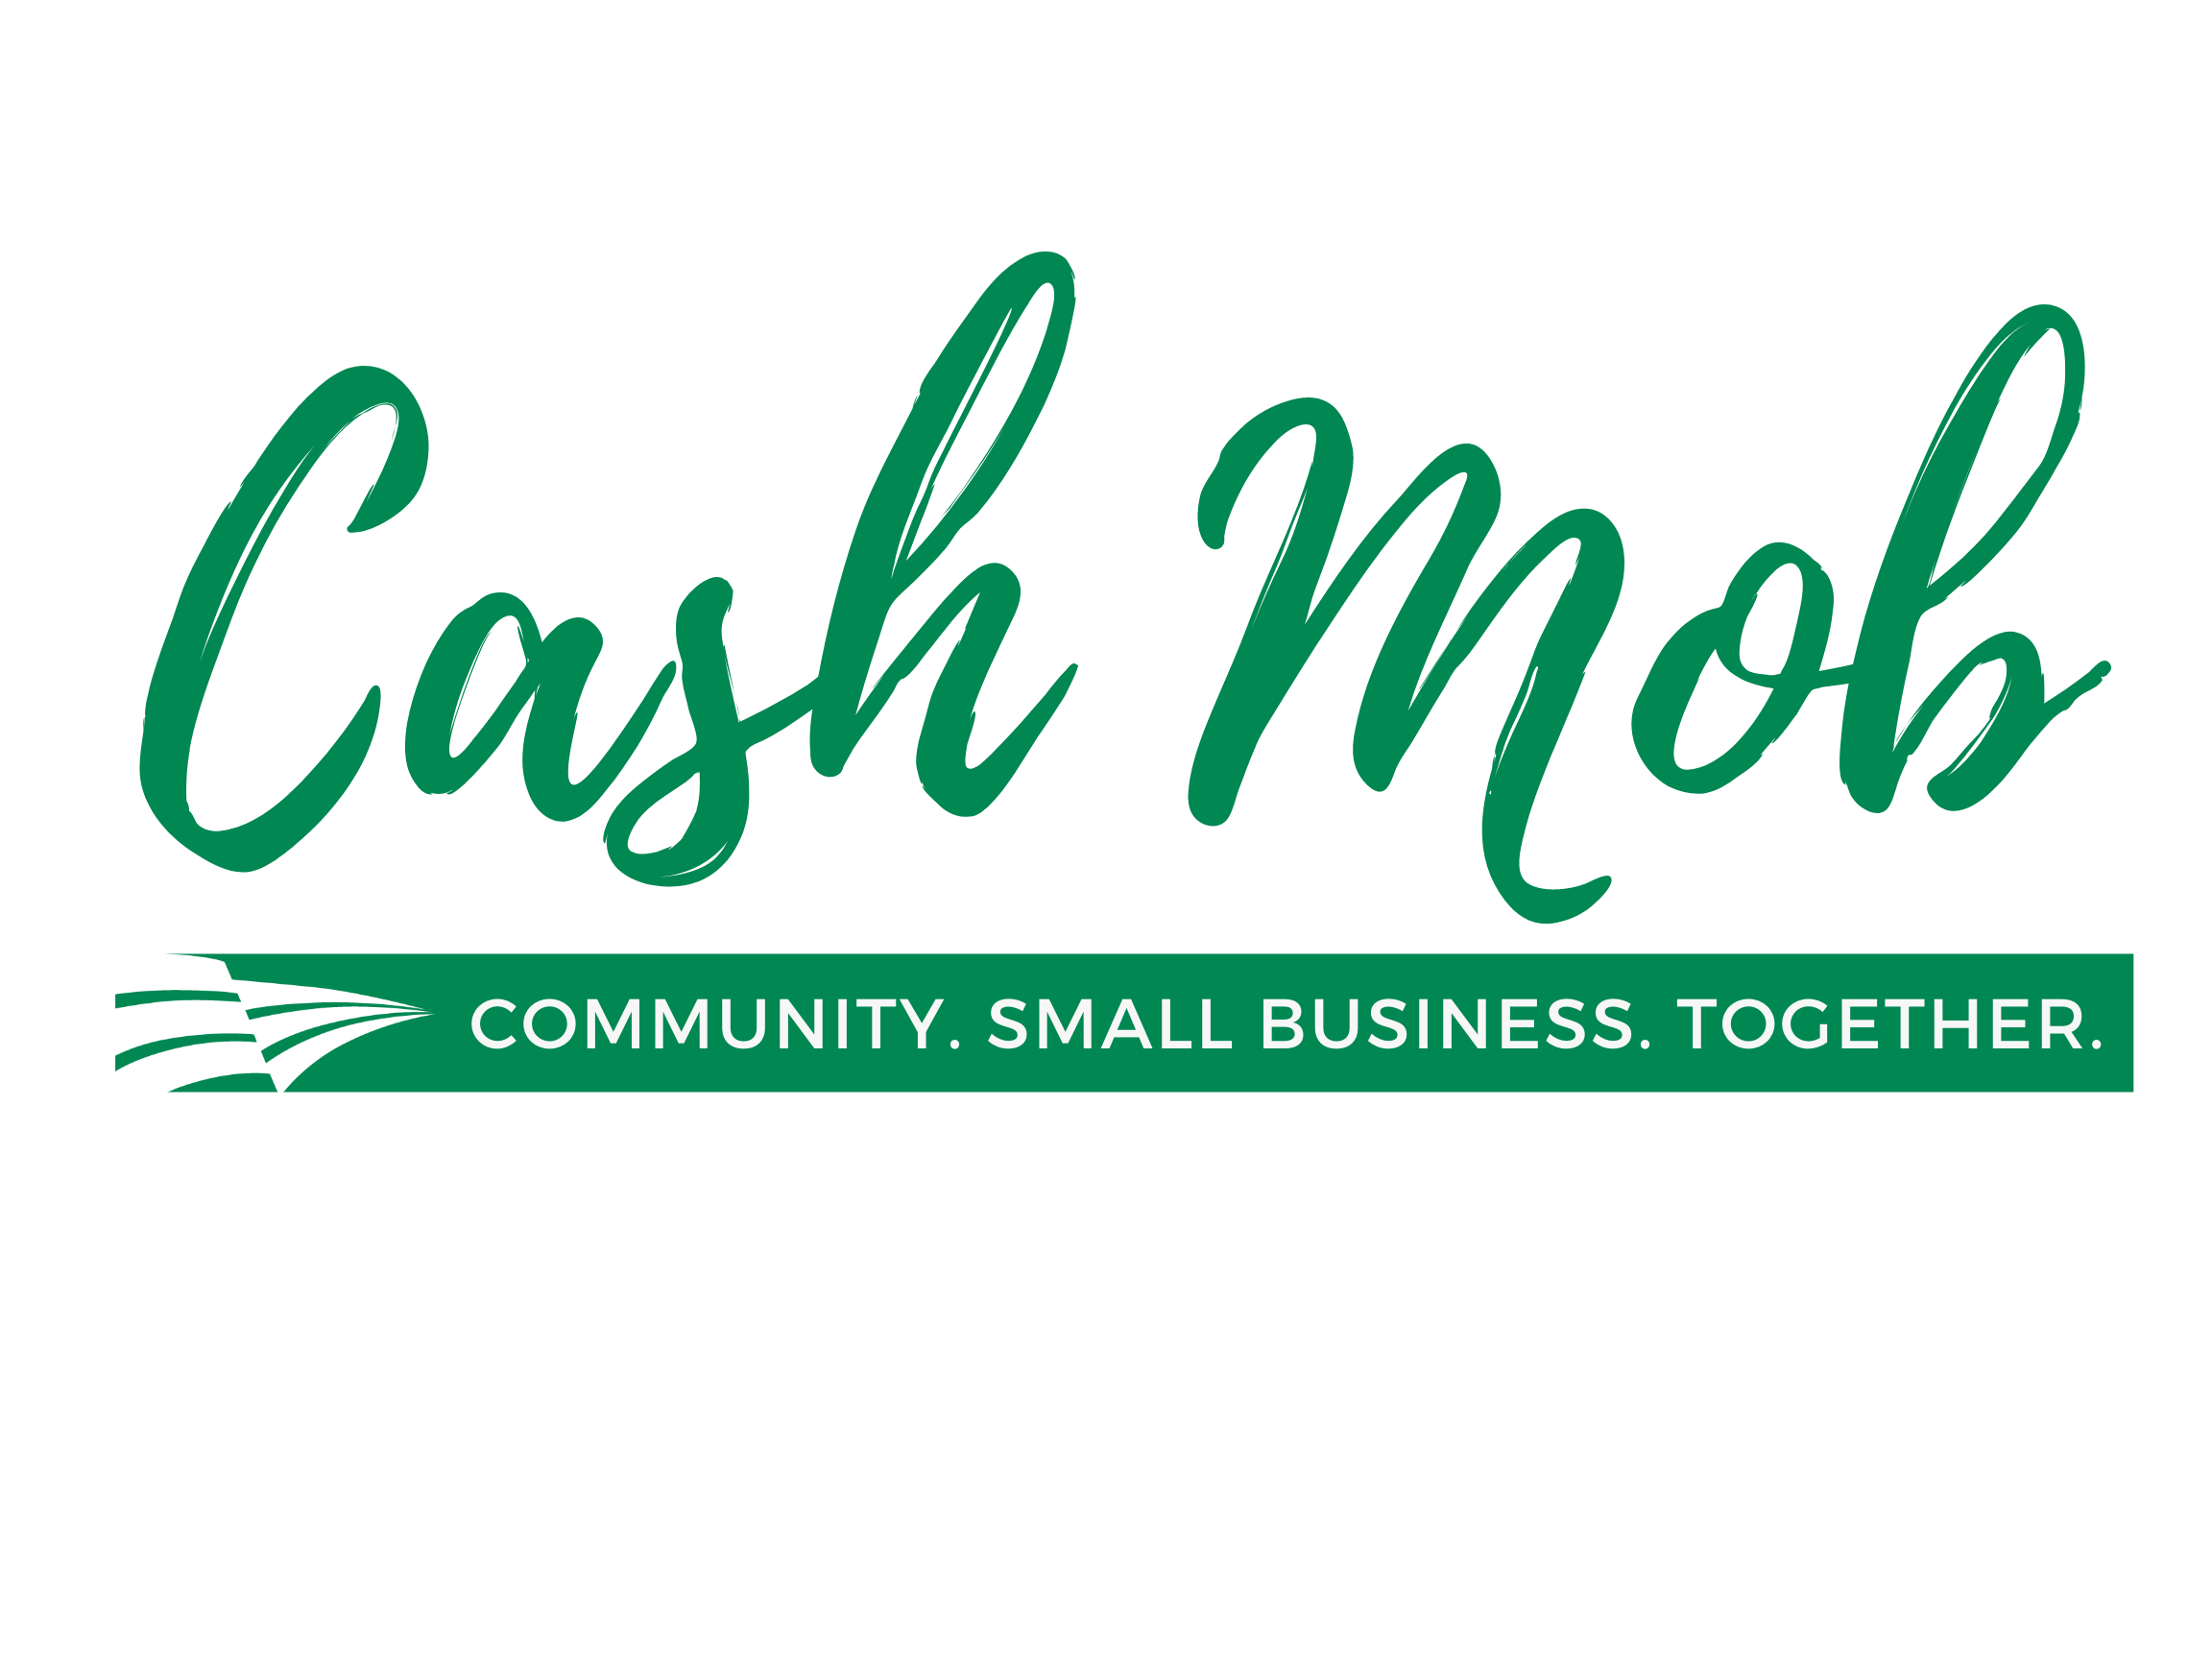 Cash Mob, Community, Small Business, Together text